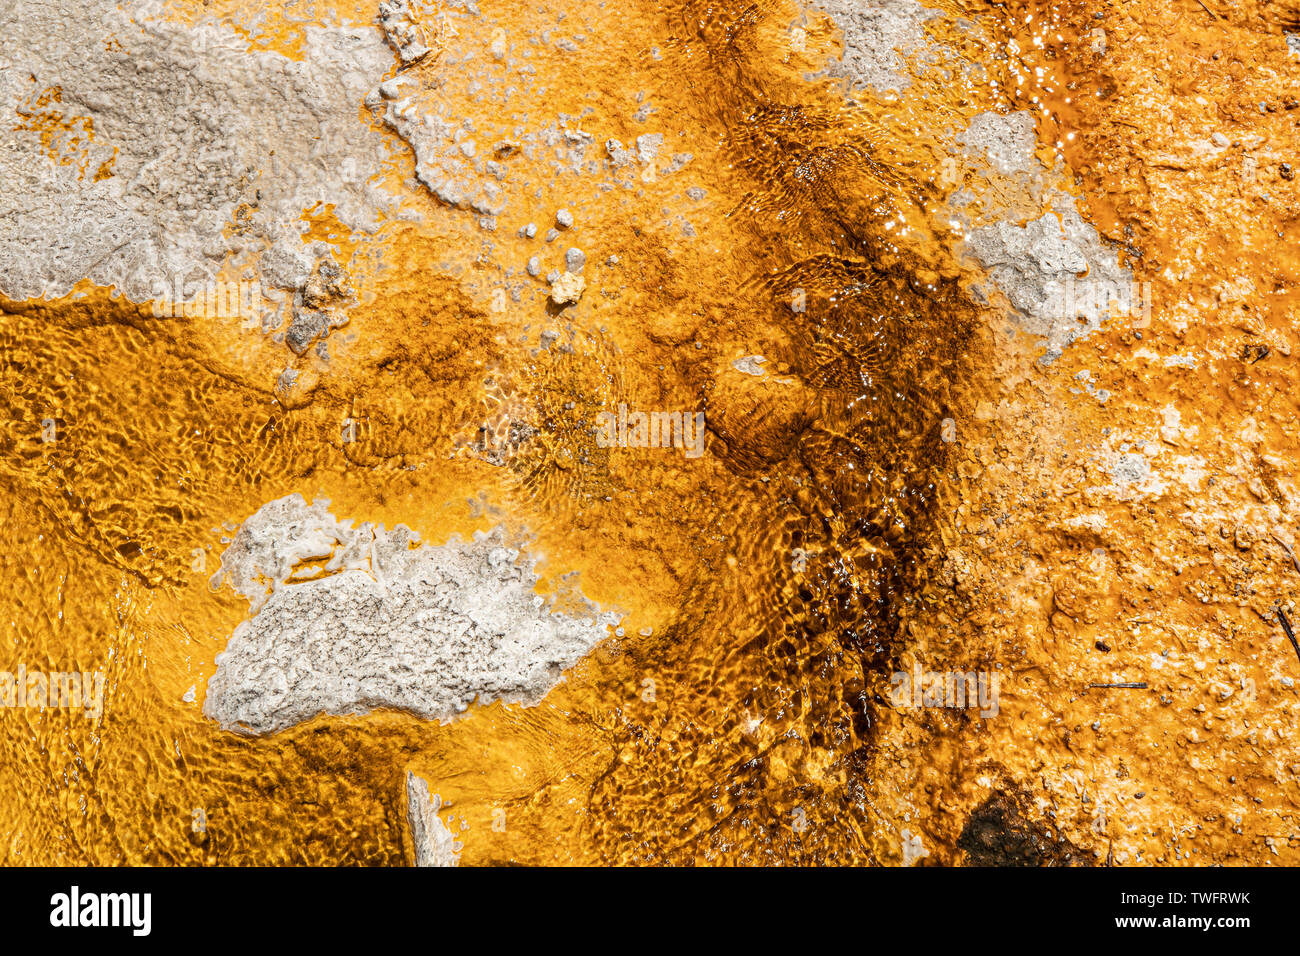 mineral deposits in the hot springs at Old Faithful, Yellowstone, Wyoming, USA Stock Photo